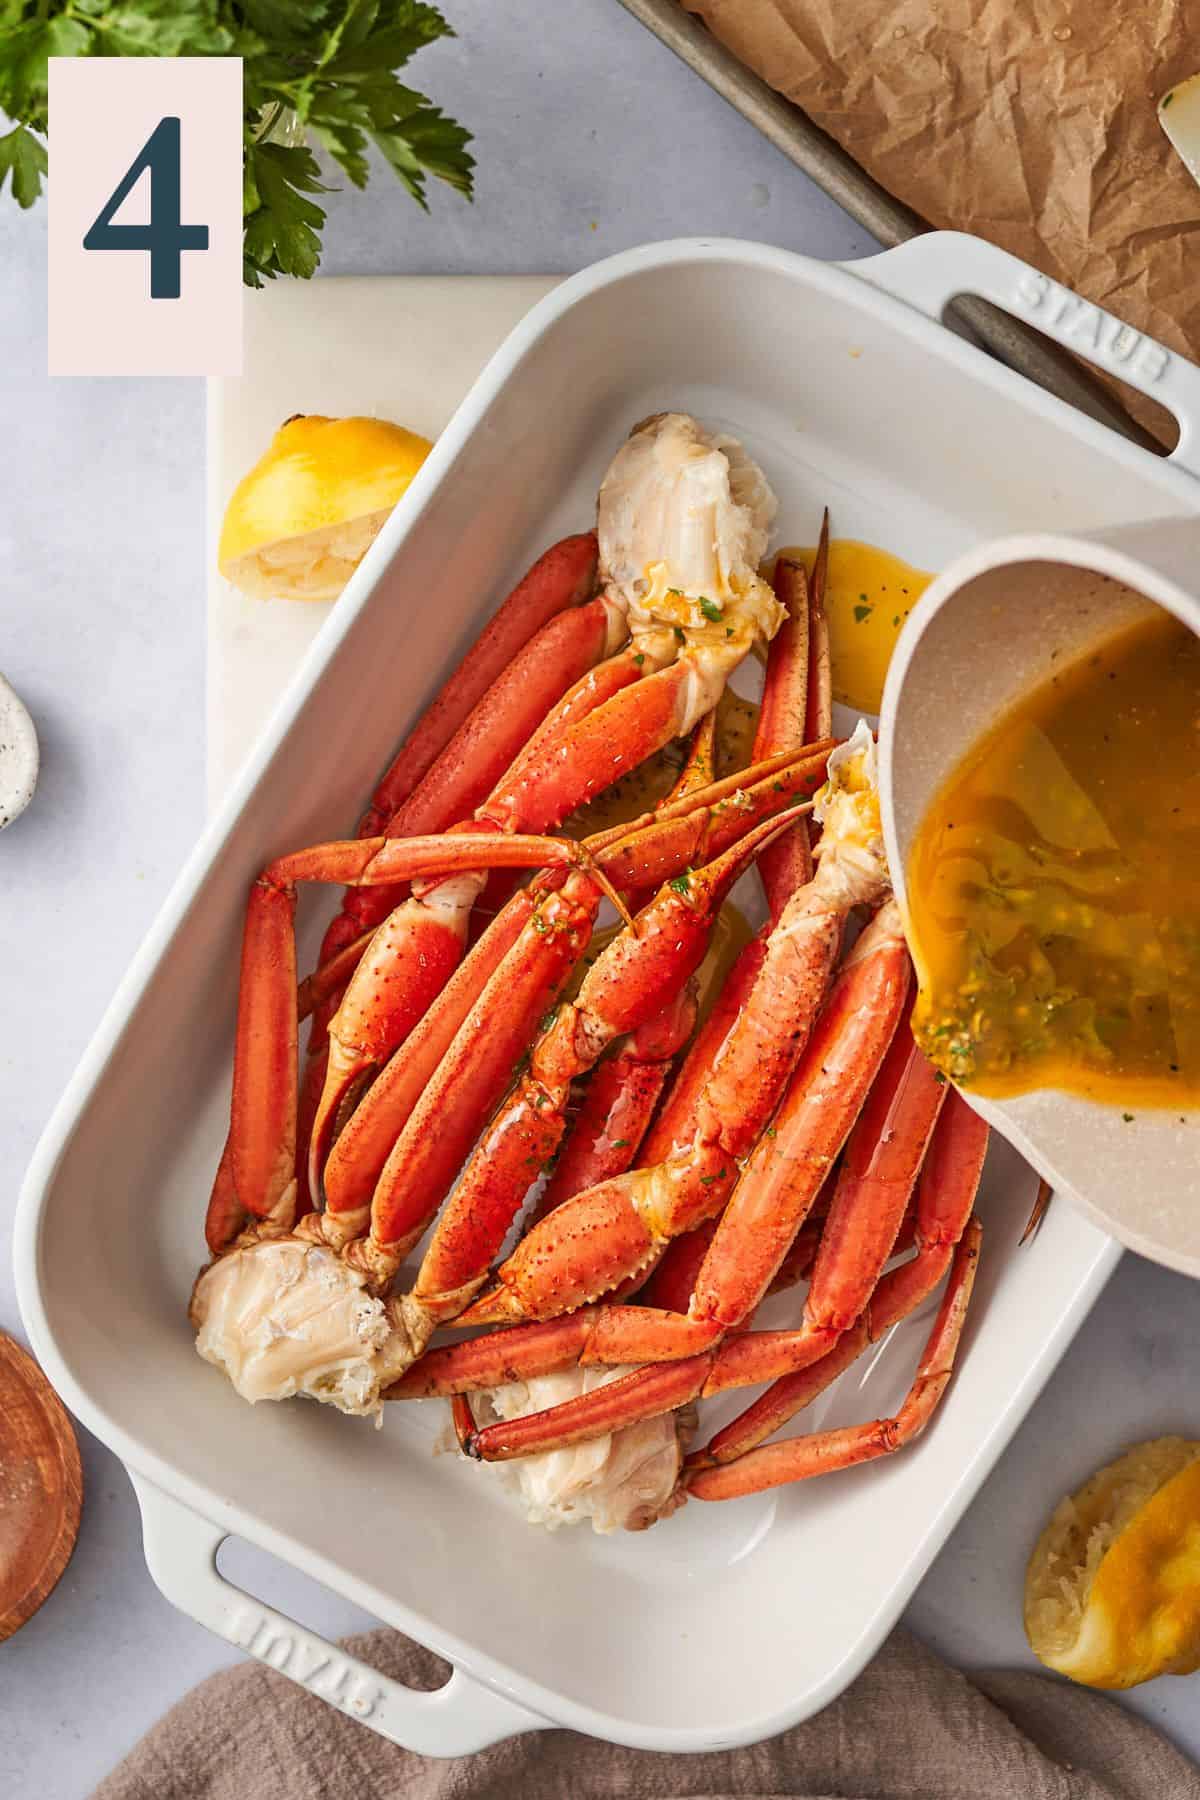 Basting crab legs with butter sauce.